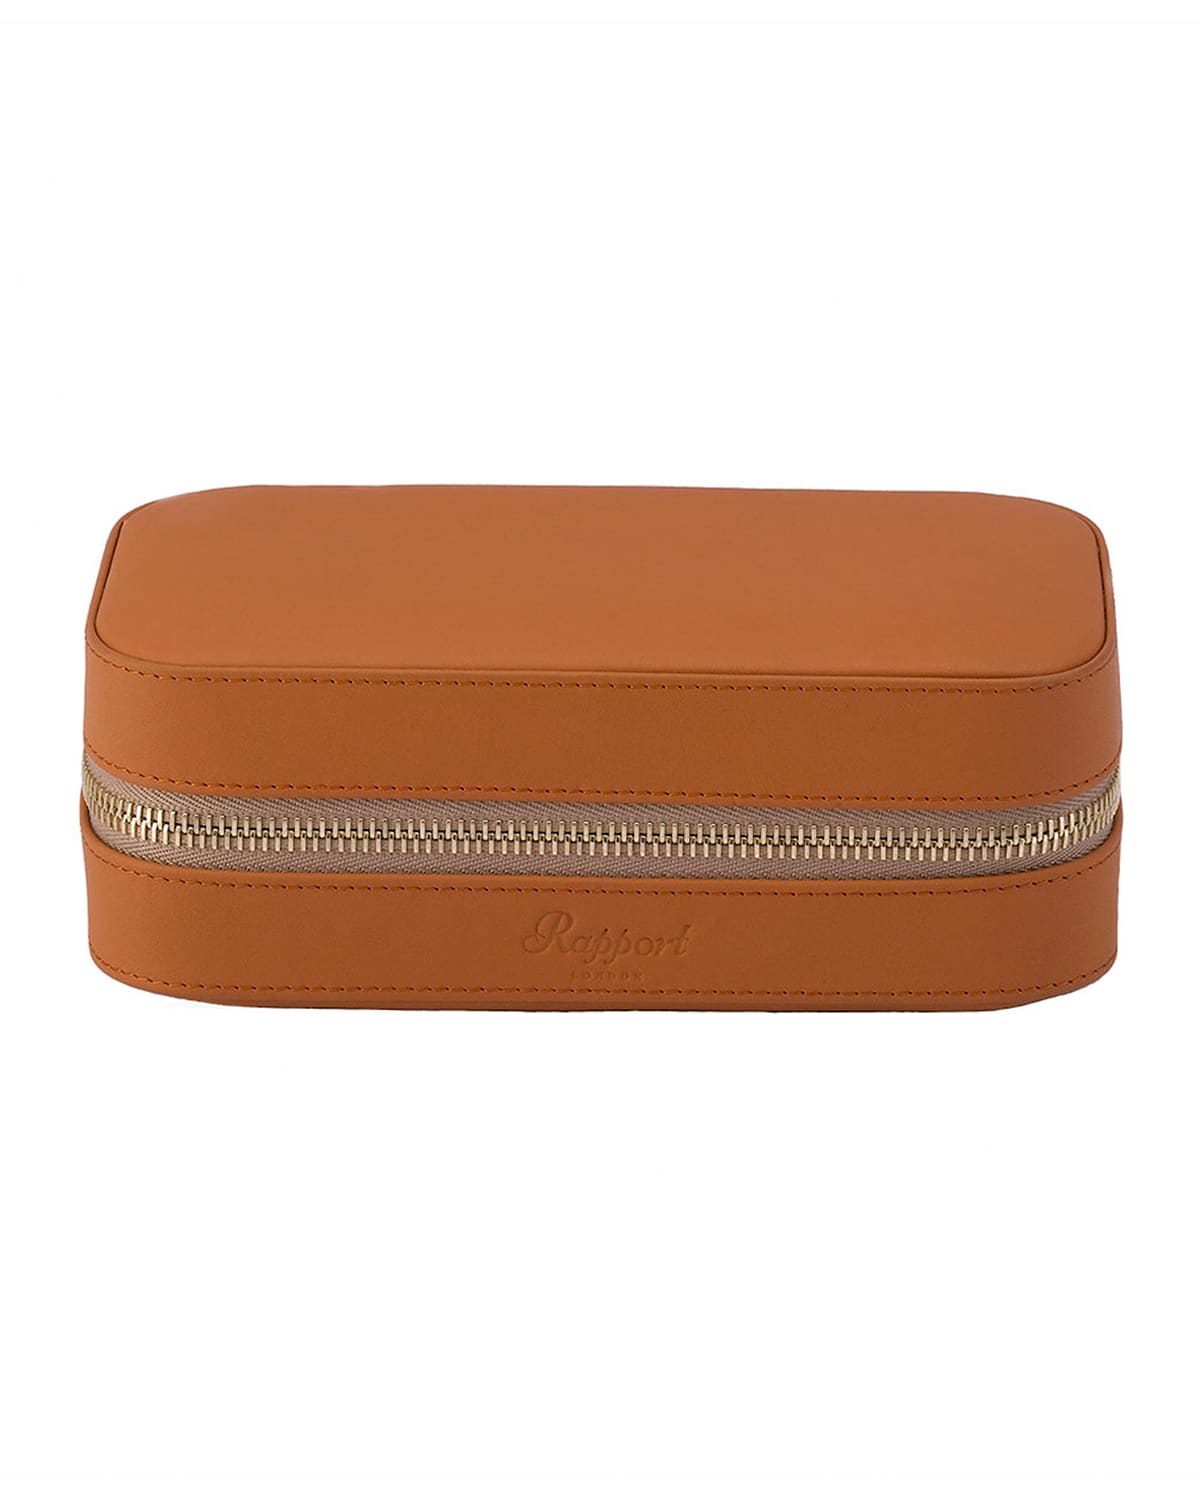 Rapport Hyde Park Two Watch Divider Case - Tan